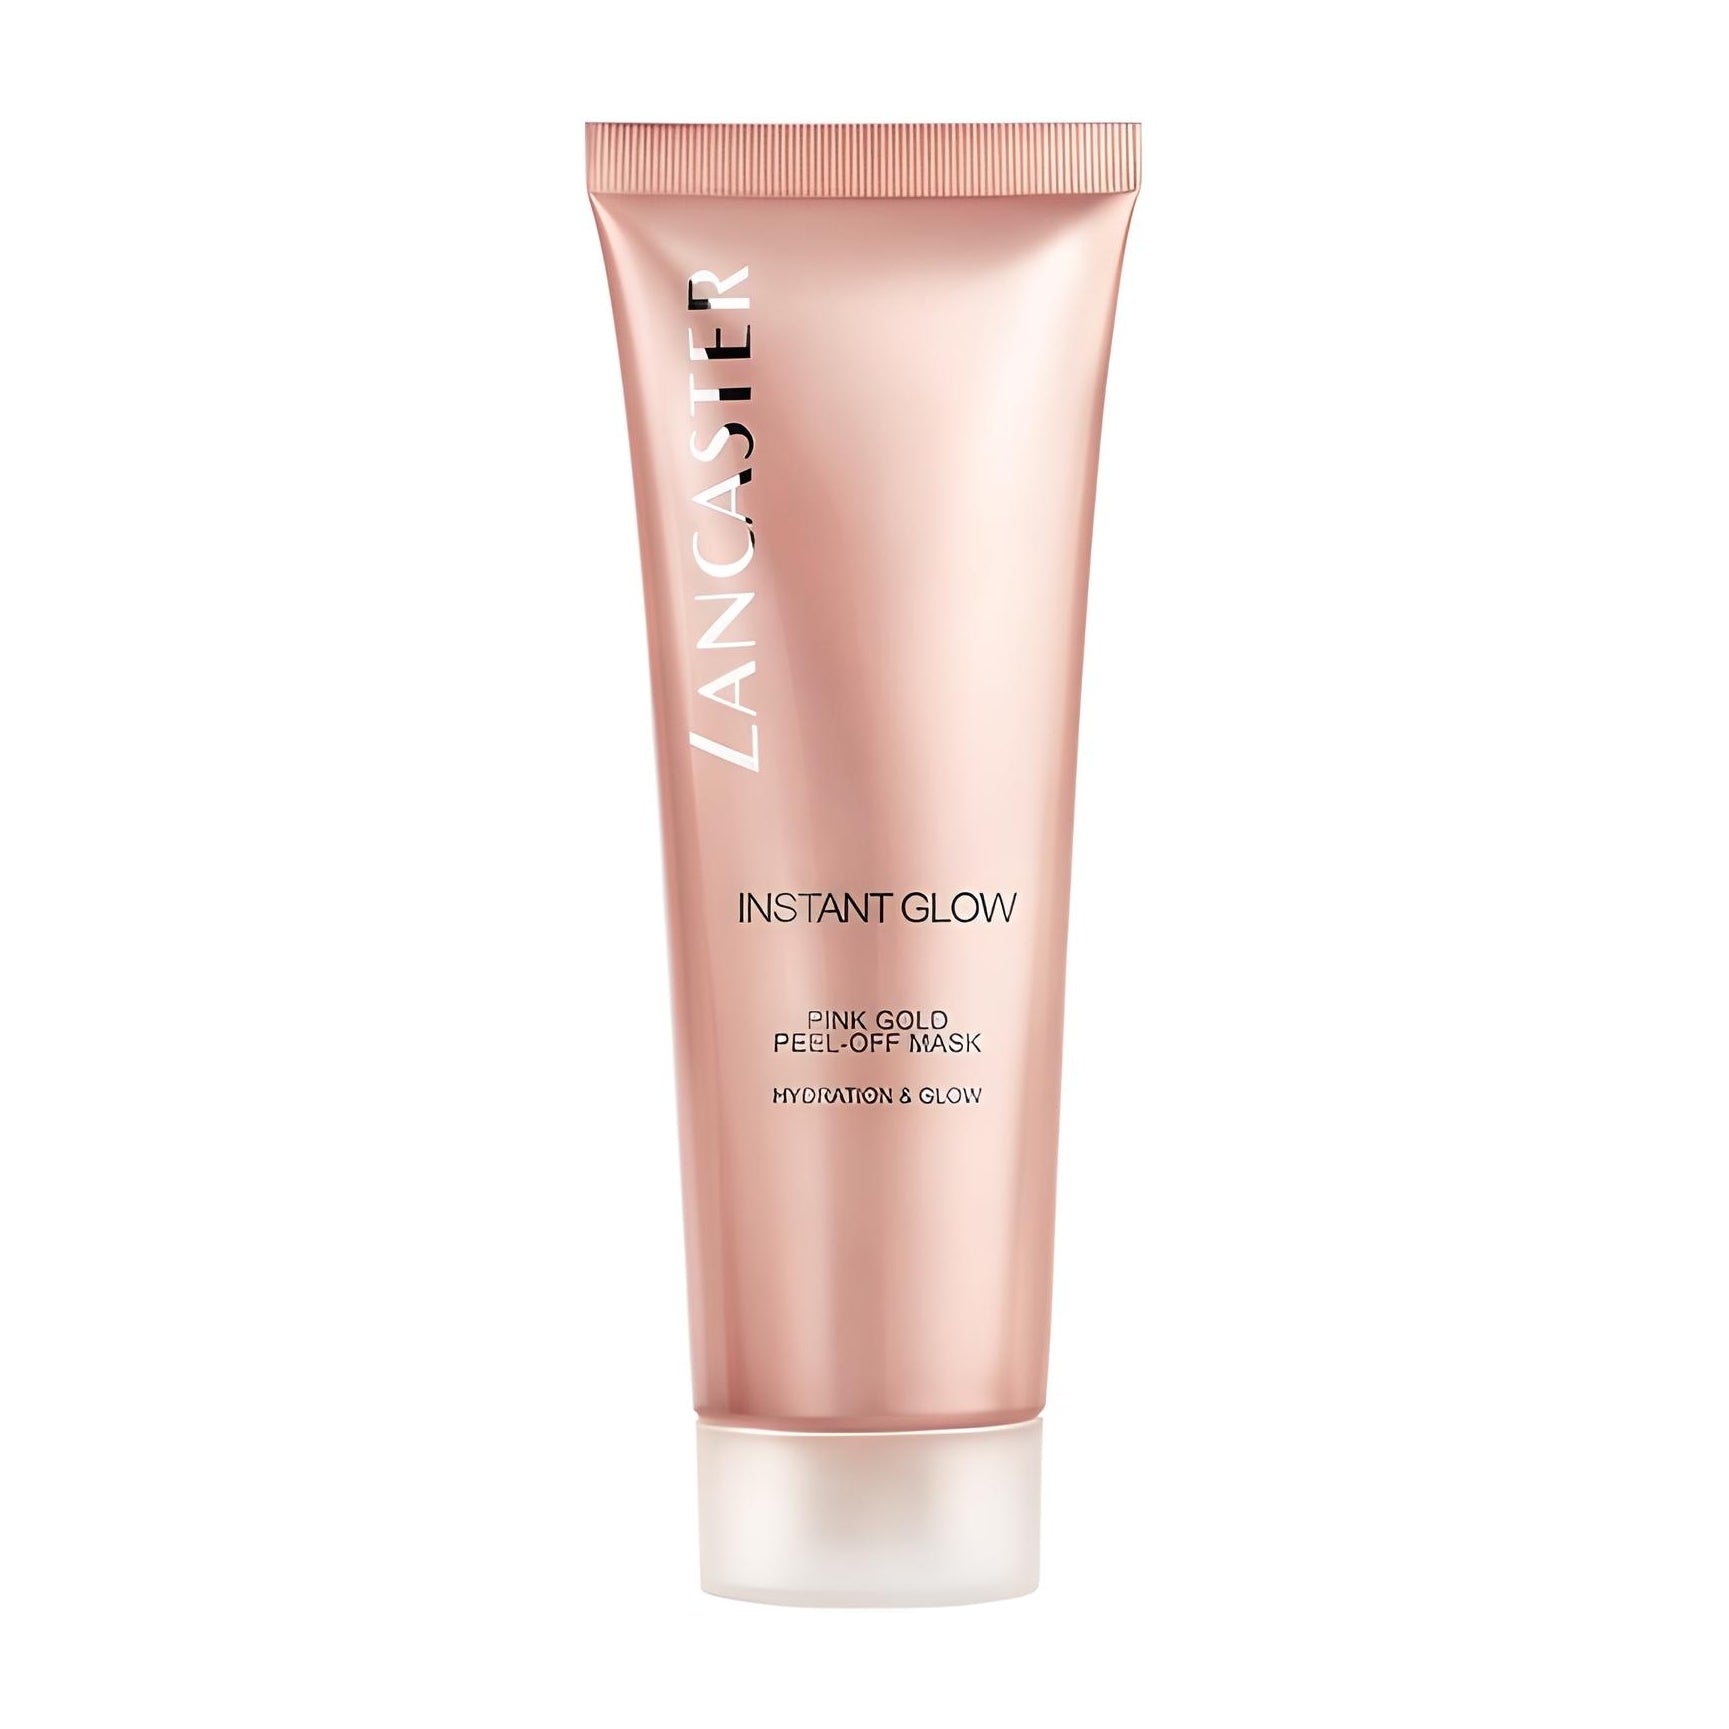 INSTANT GLOW pink gold peel-off mask